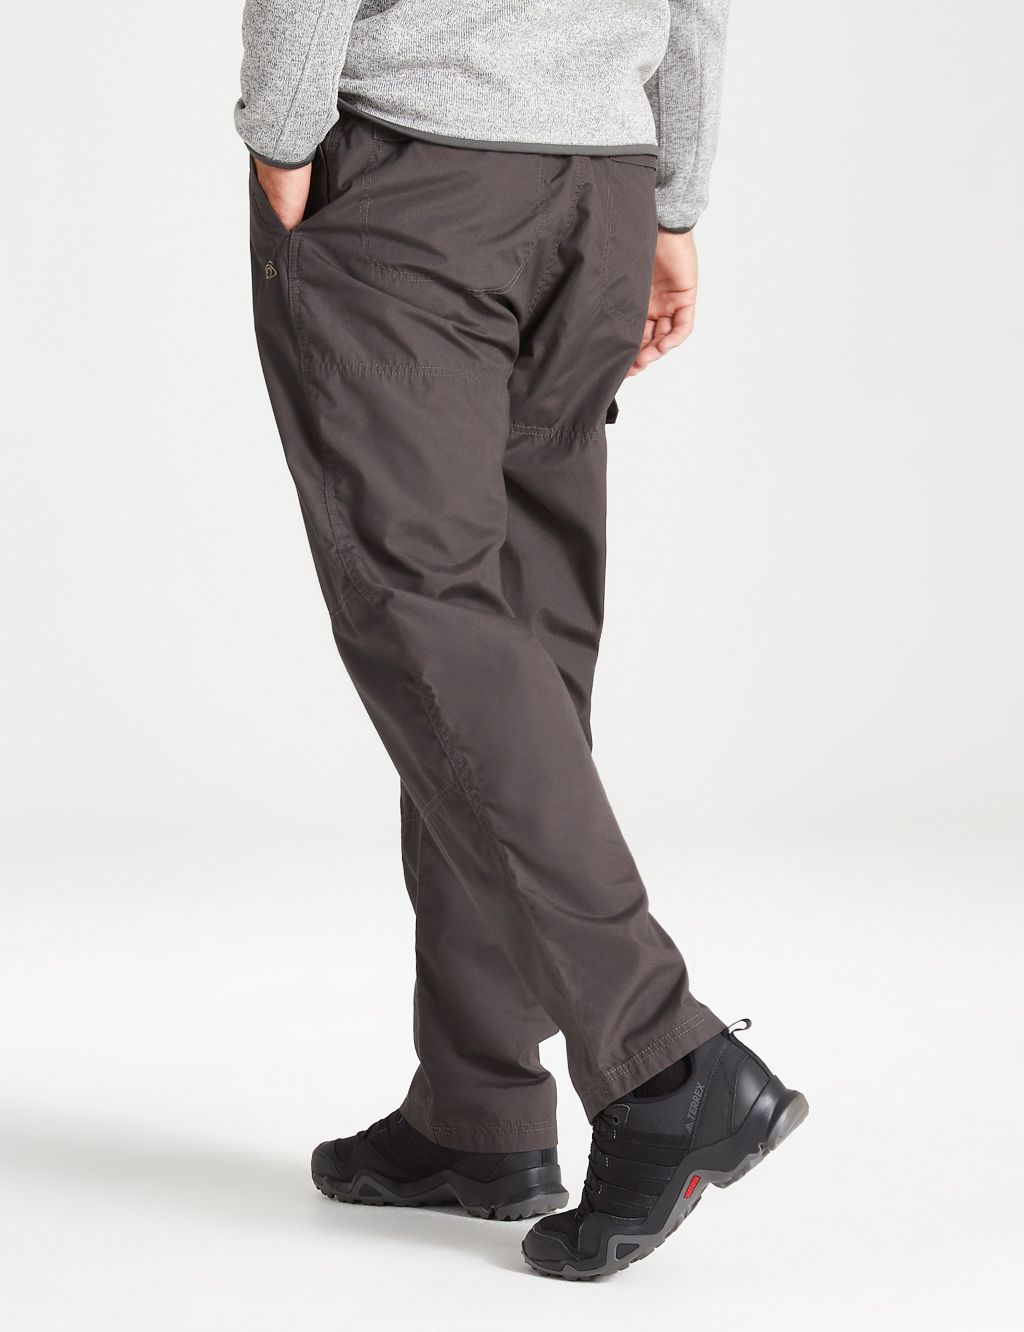 Kiwi Loose Fit Cargo Trousers image 4